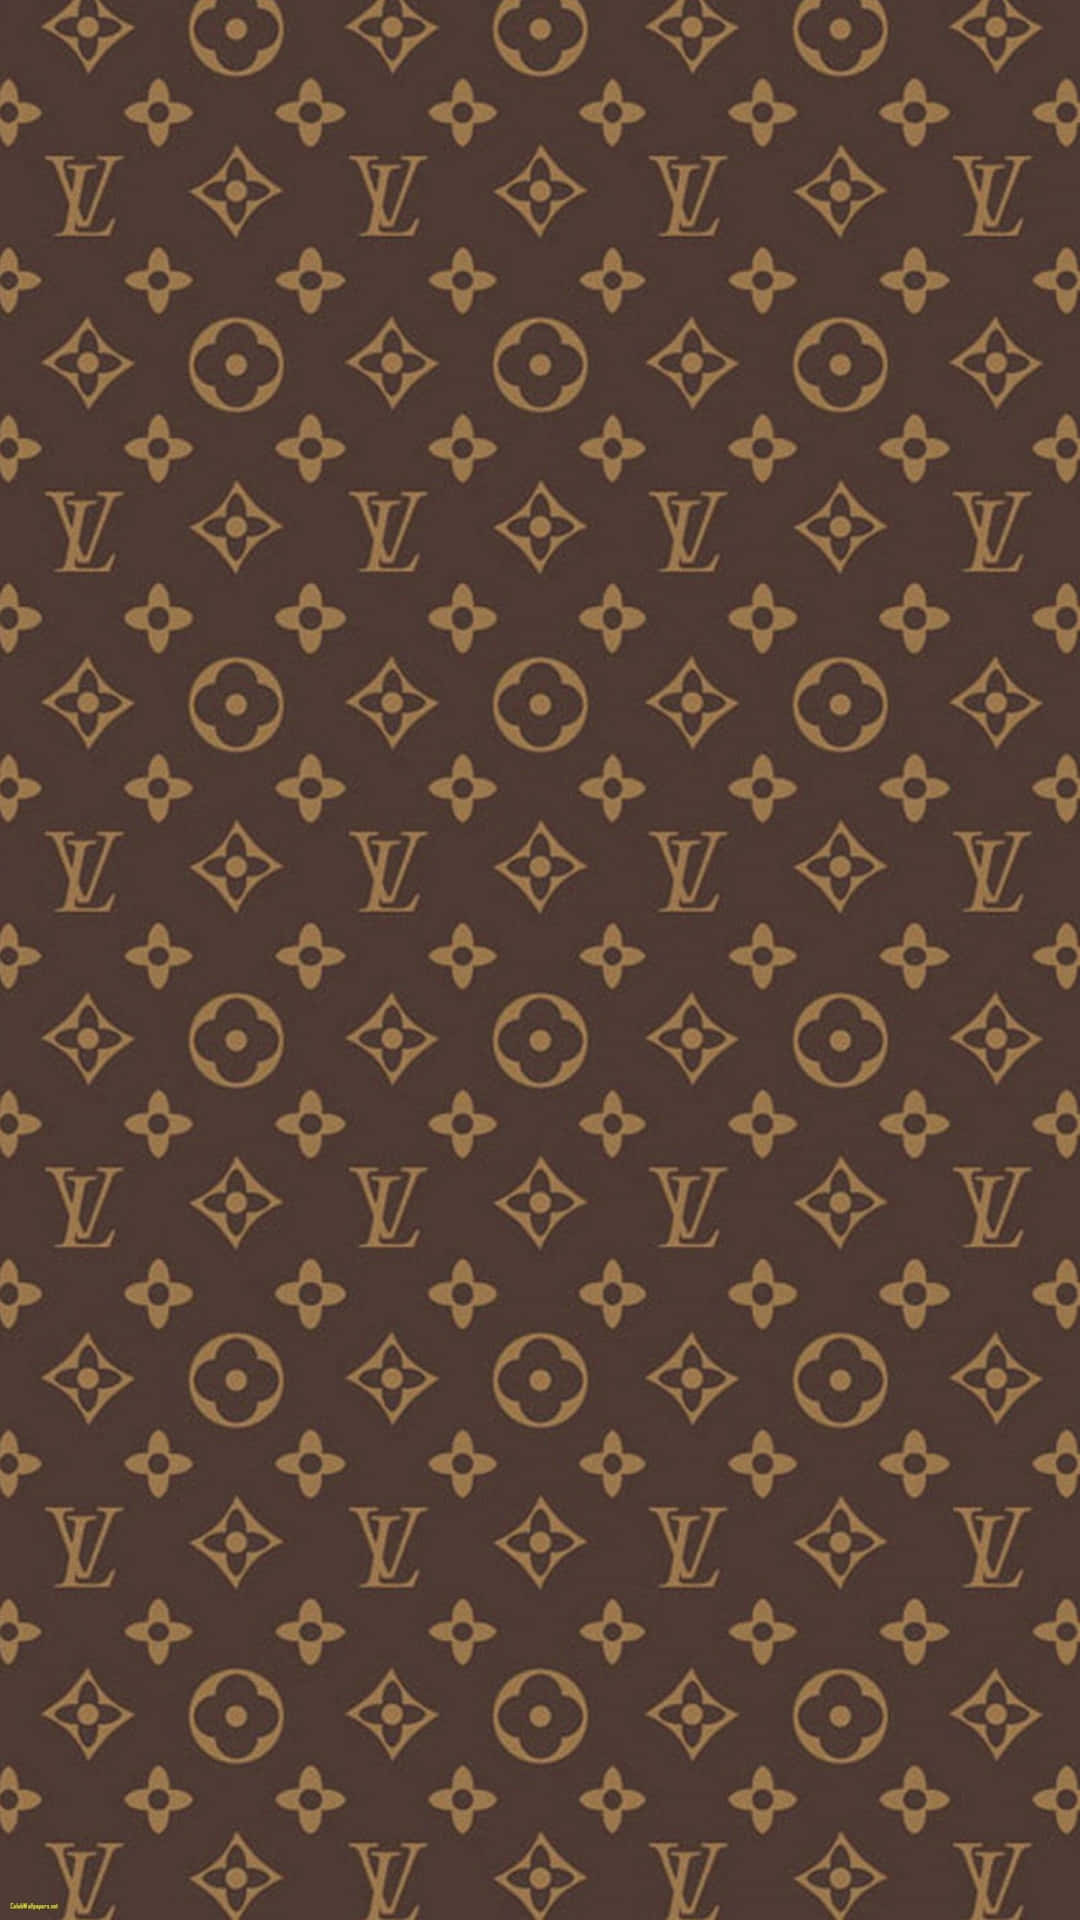 100+] Louis Vuitton Iphone Wallpapers